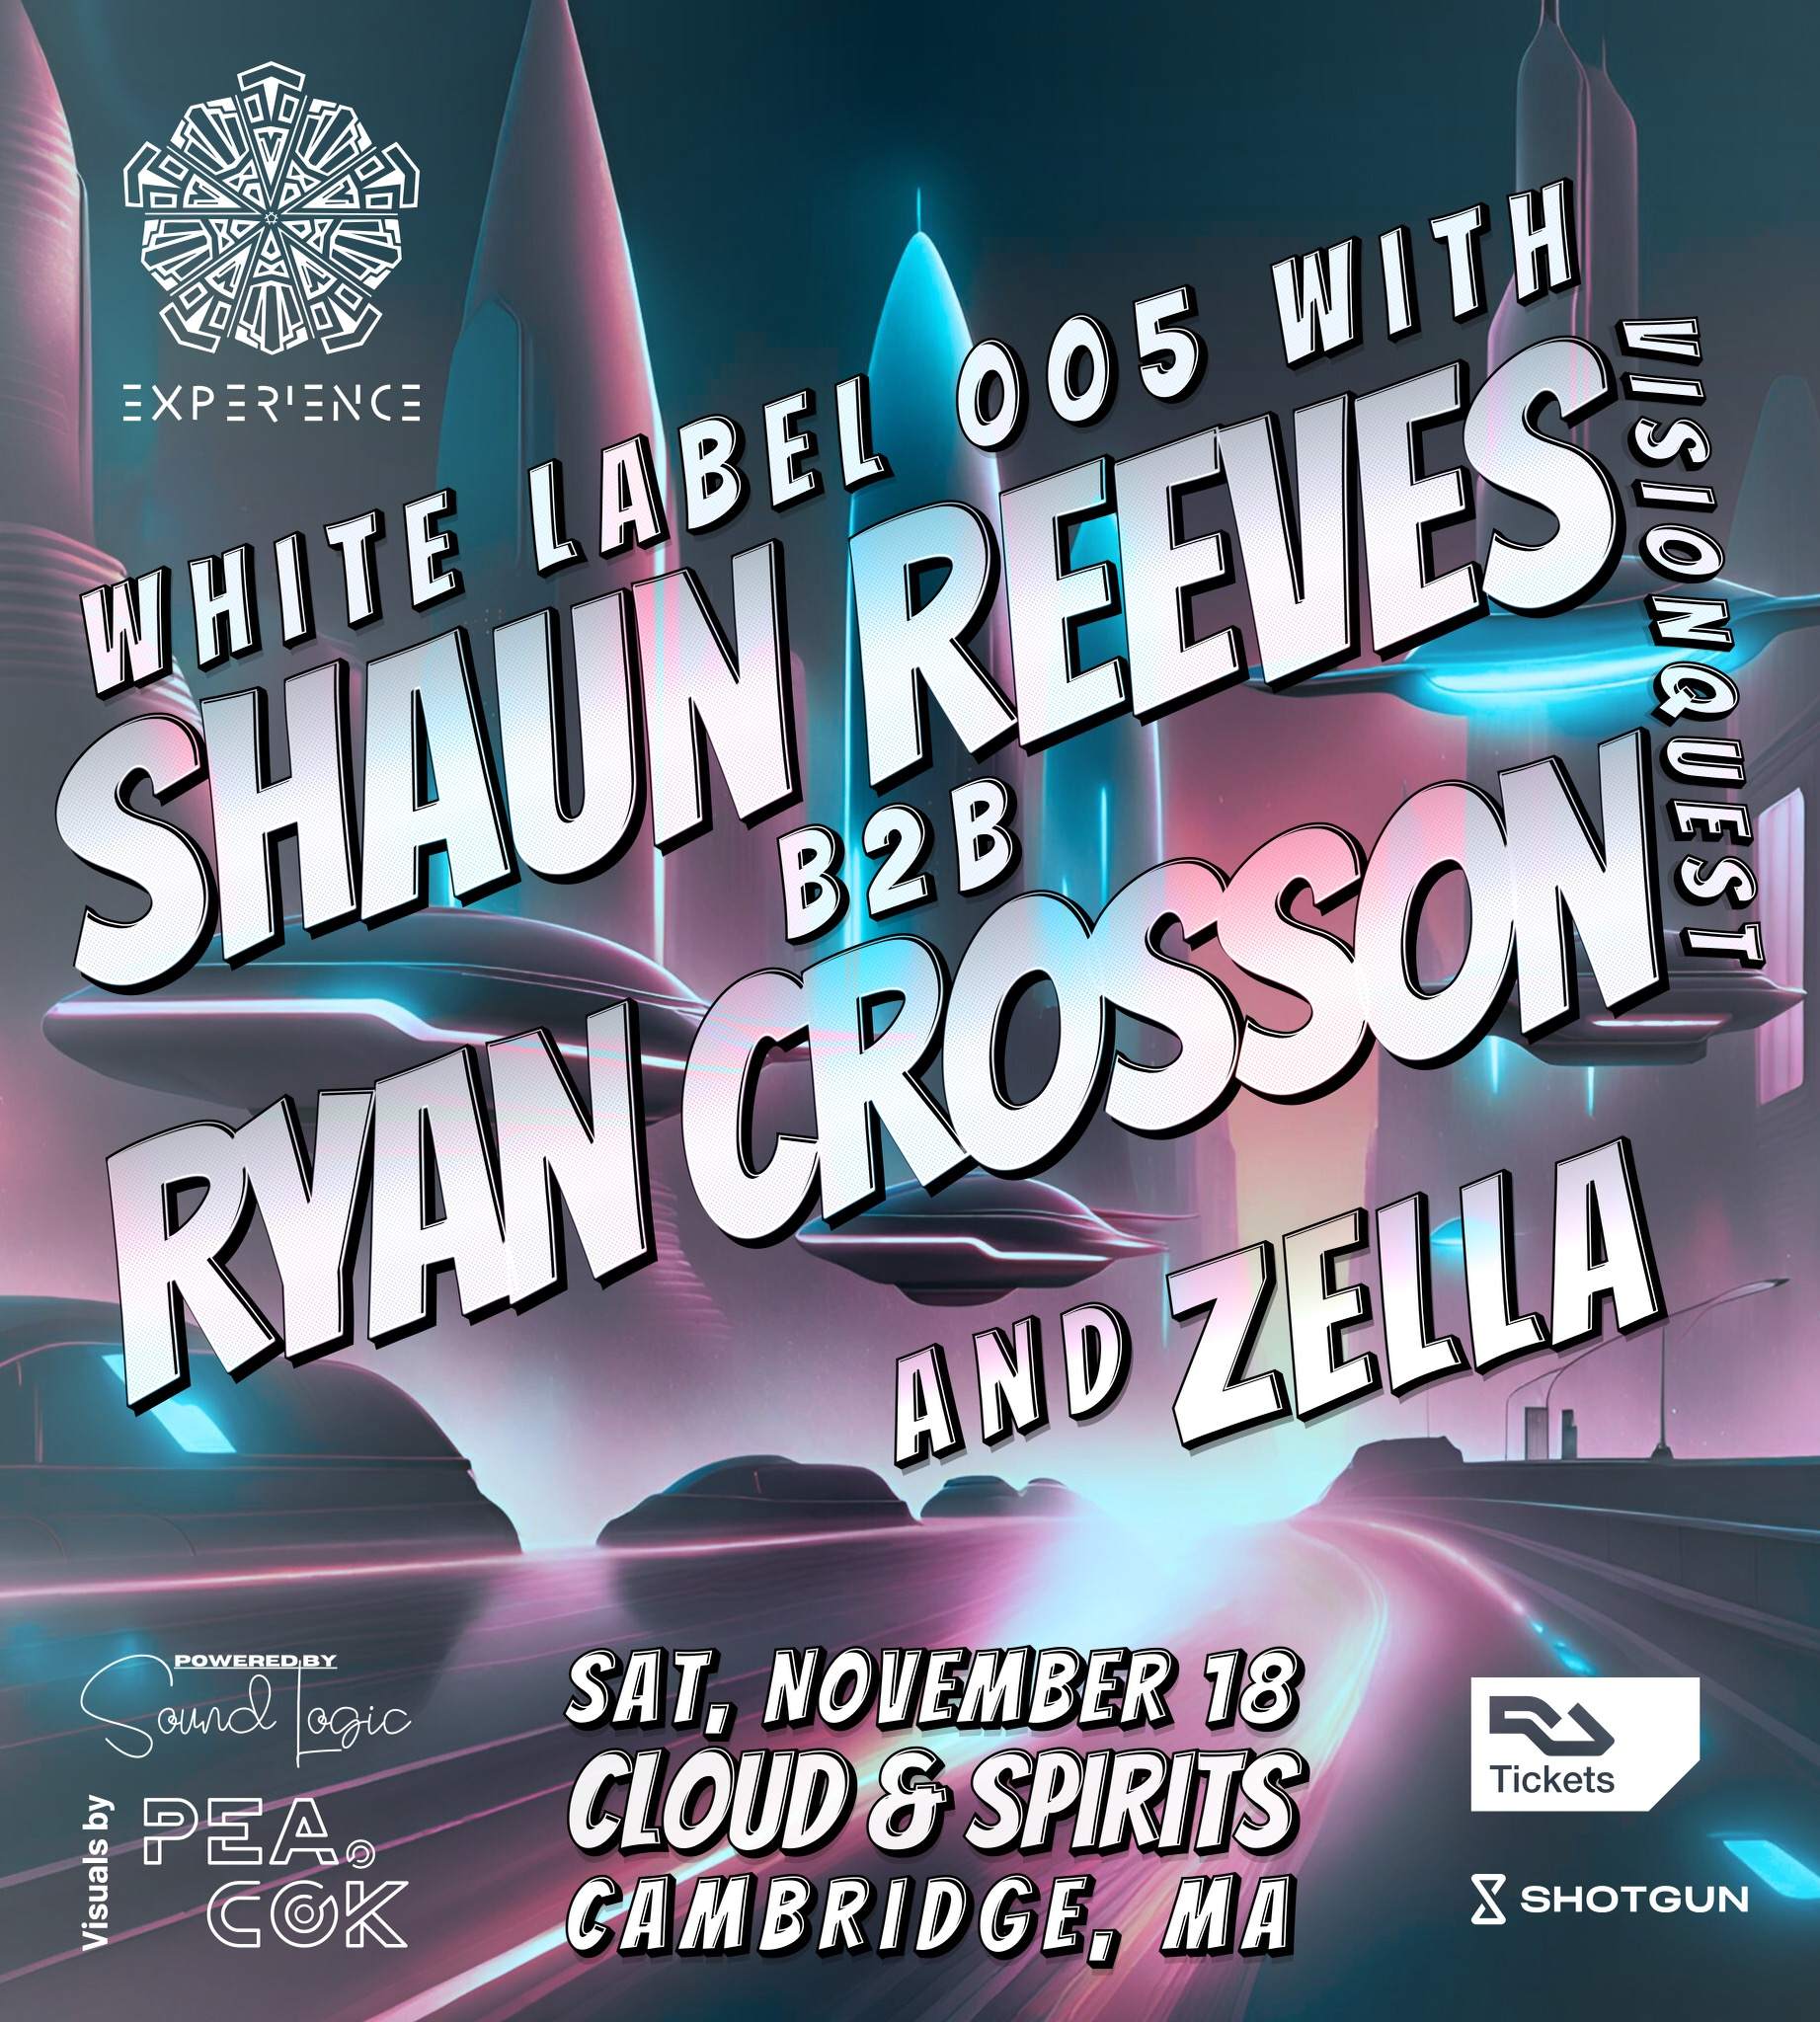 White Label x Experience + Shaun Reeves - Página frontal